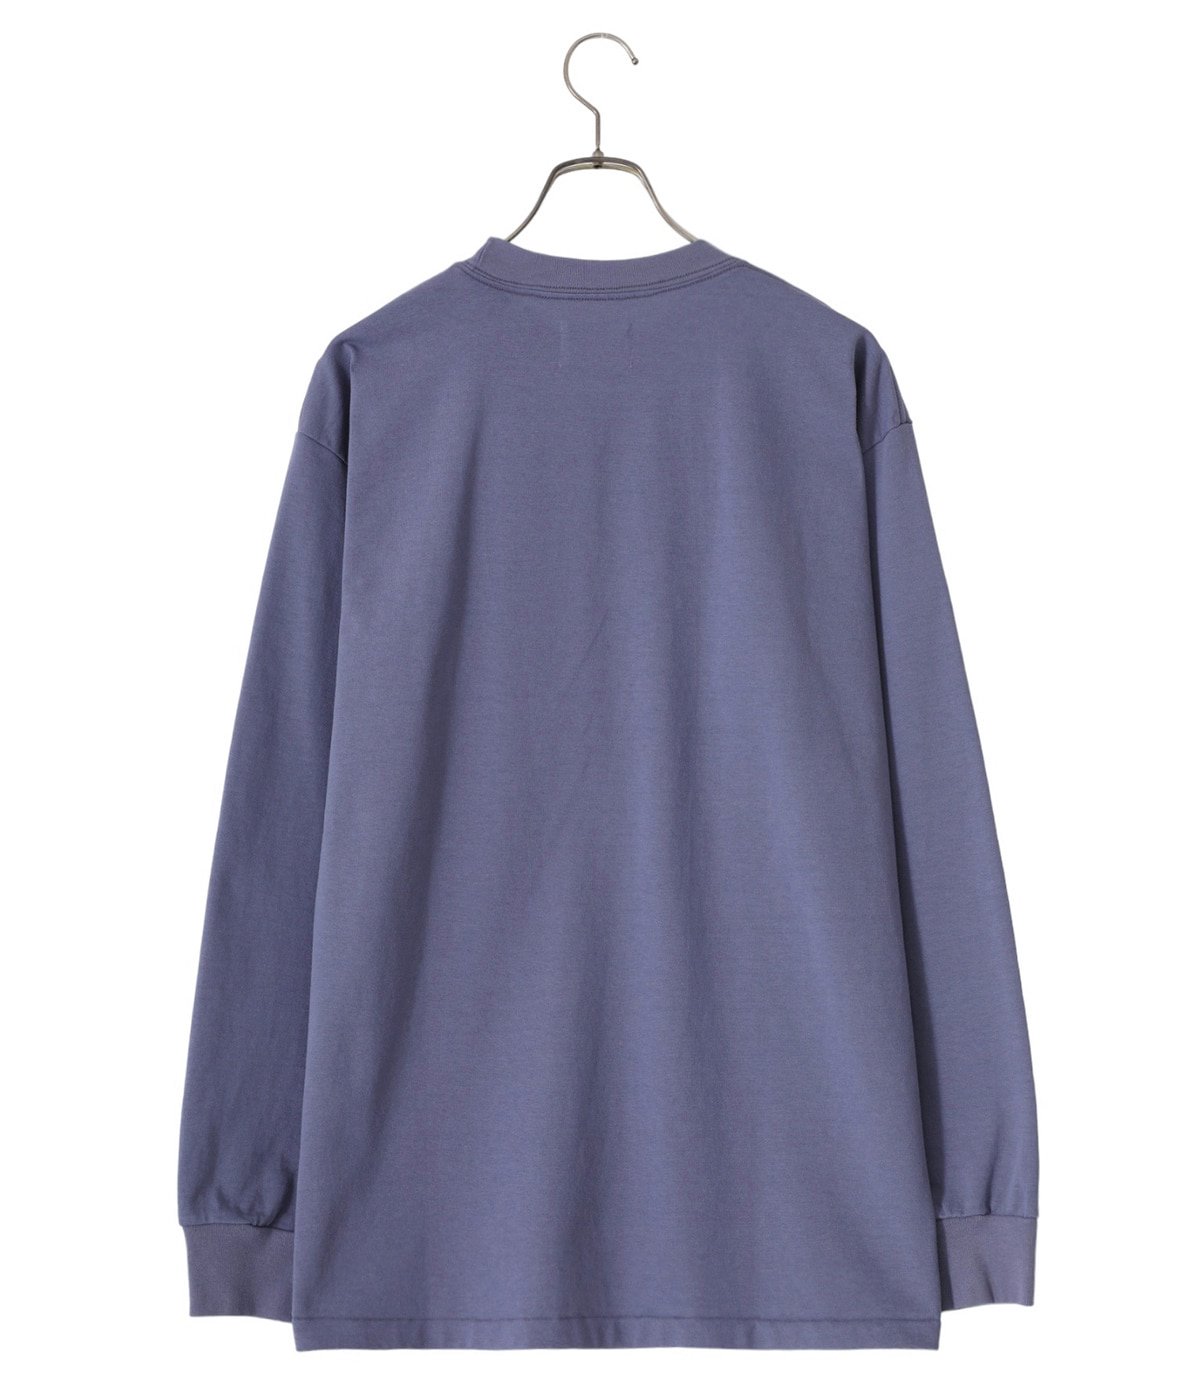 Long sleeve T-shirt | PORT BY ARK(ポートバイアーク) / トップス 